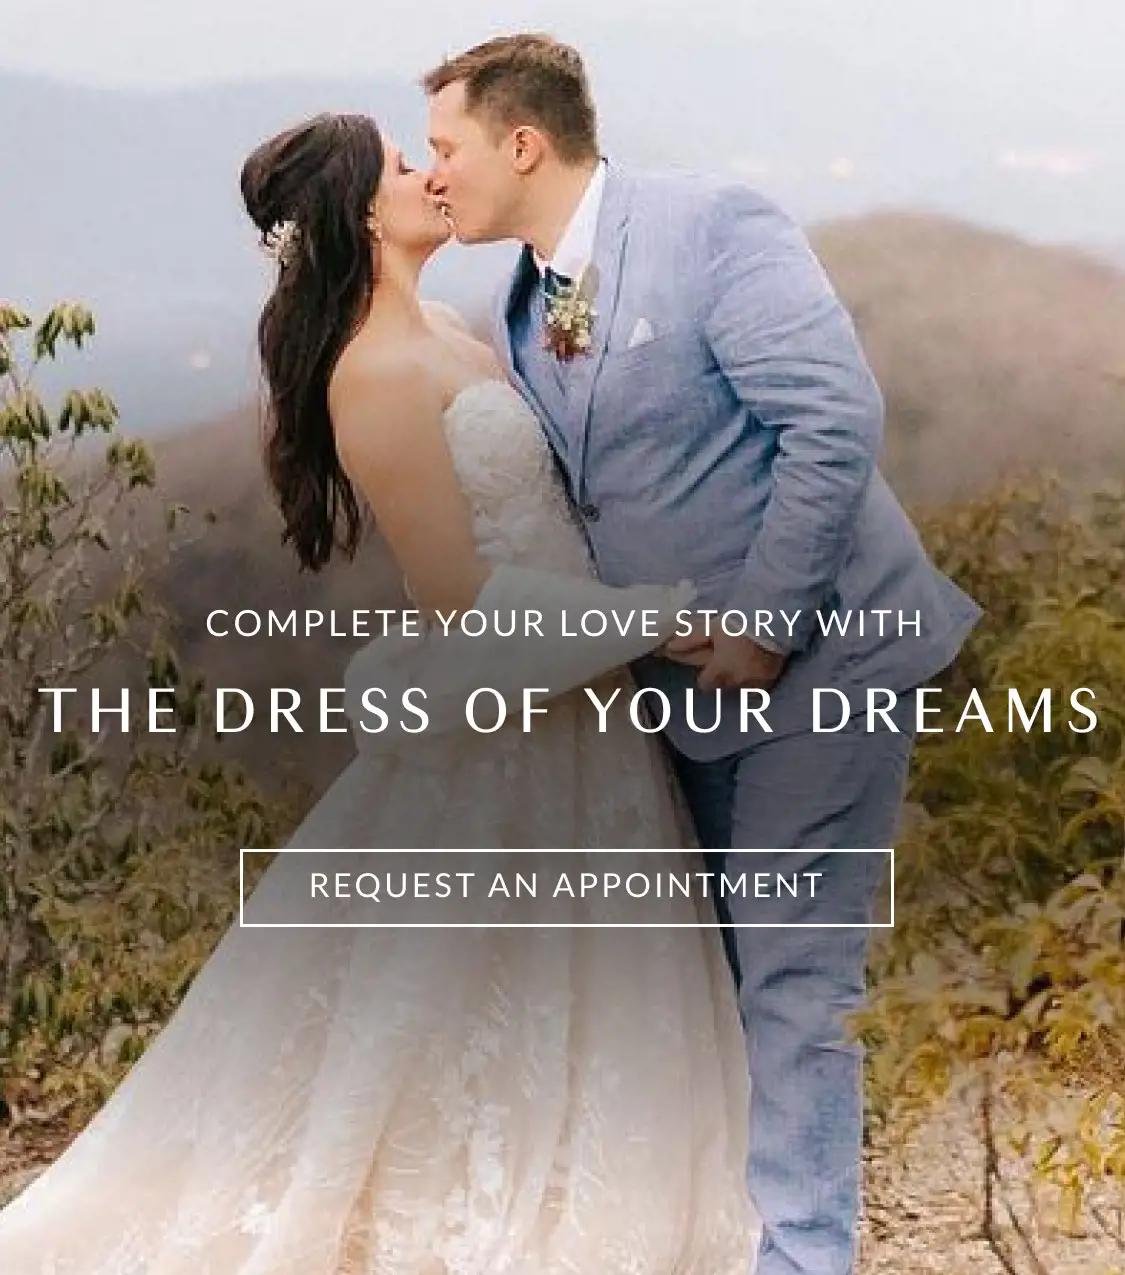 Find your dream wedding dress at Allure Bridal Boutique